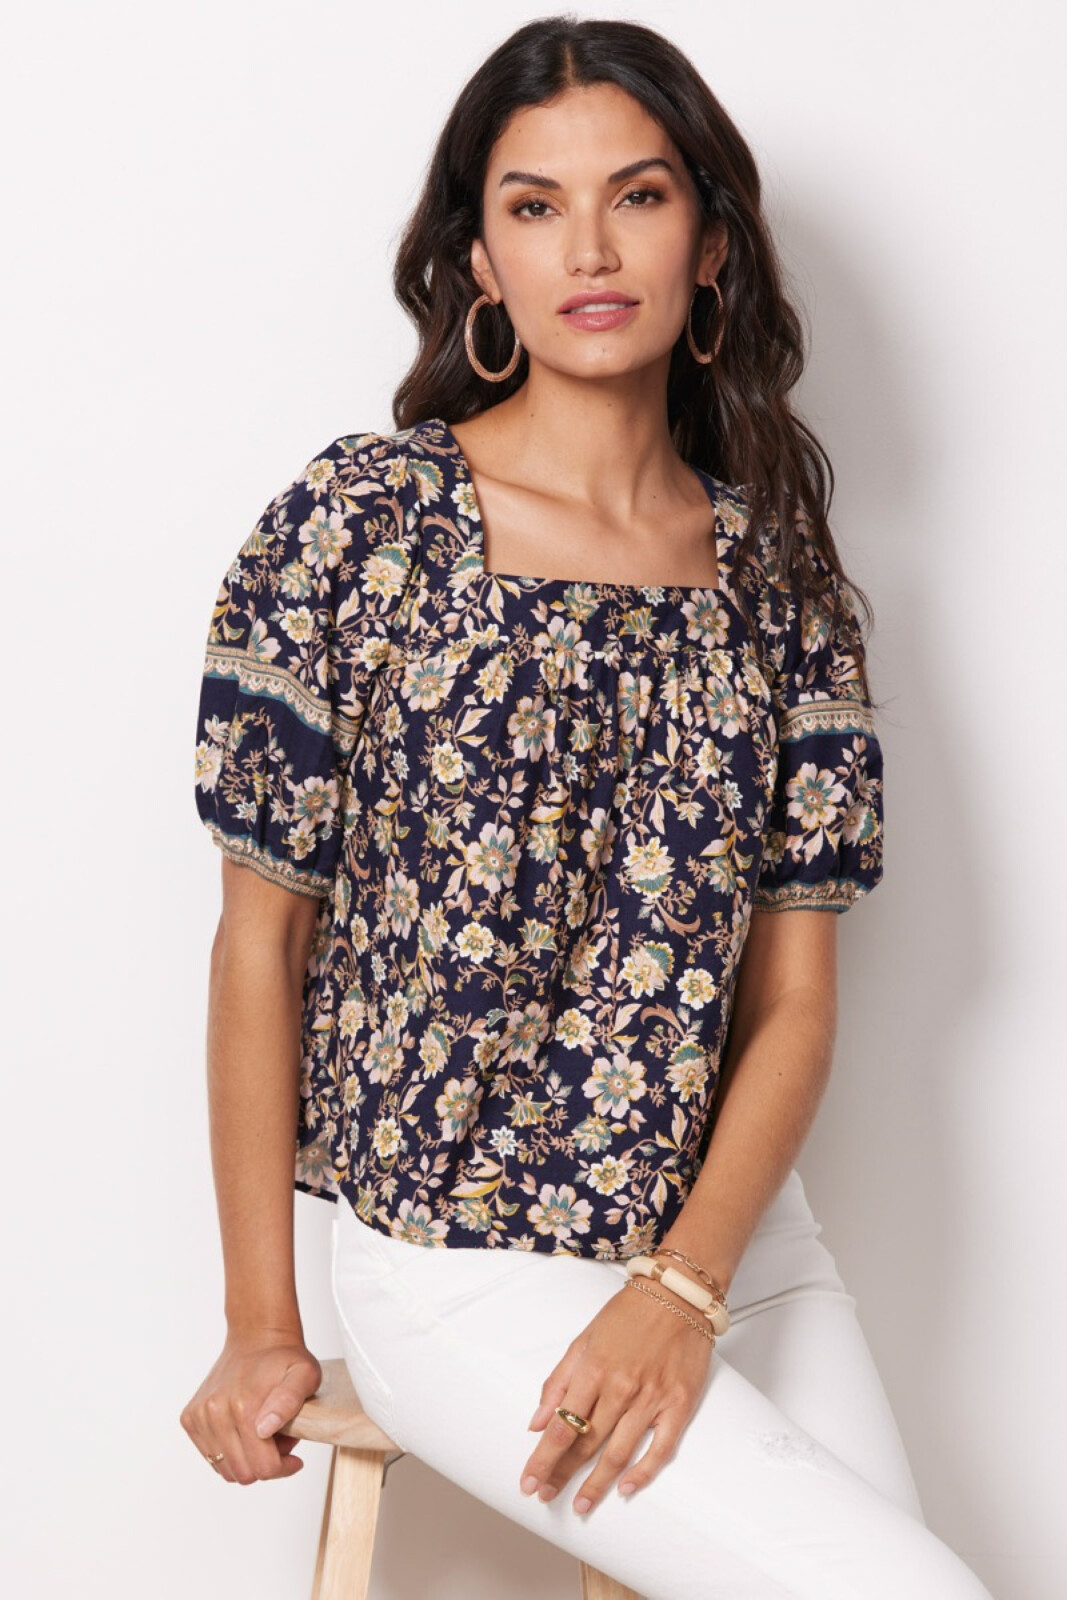 Lucky Brand Women's Square Neck Printed Top